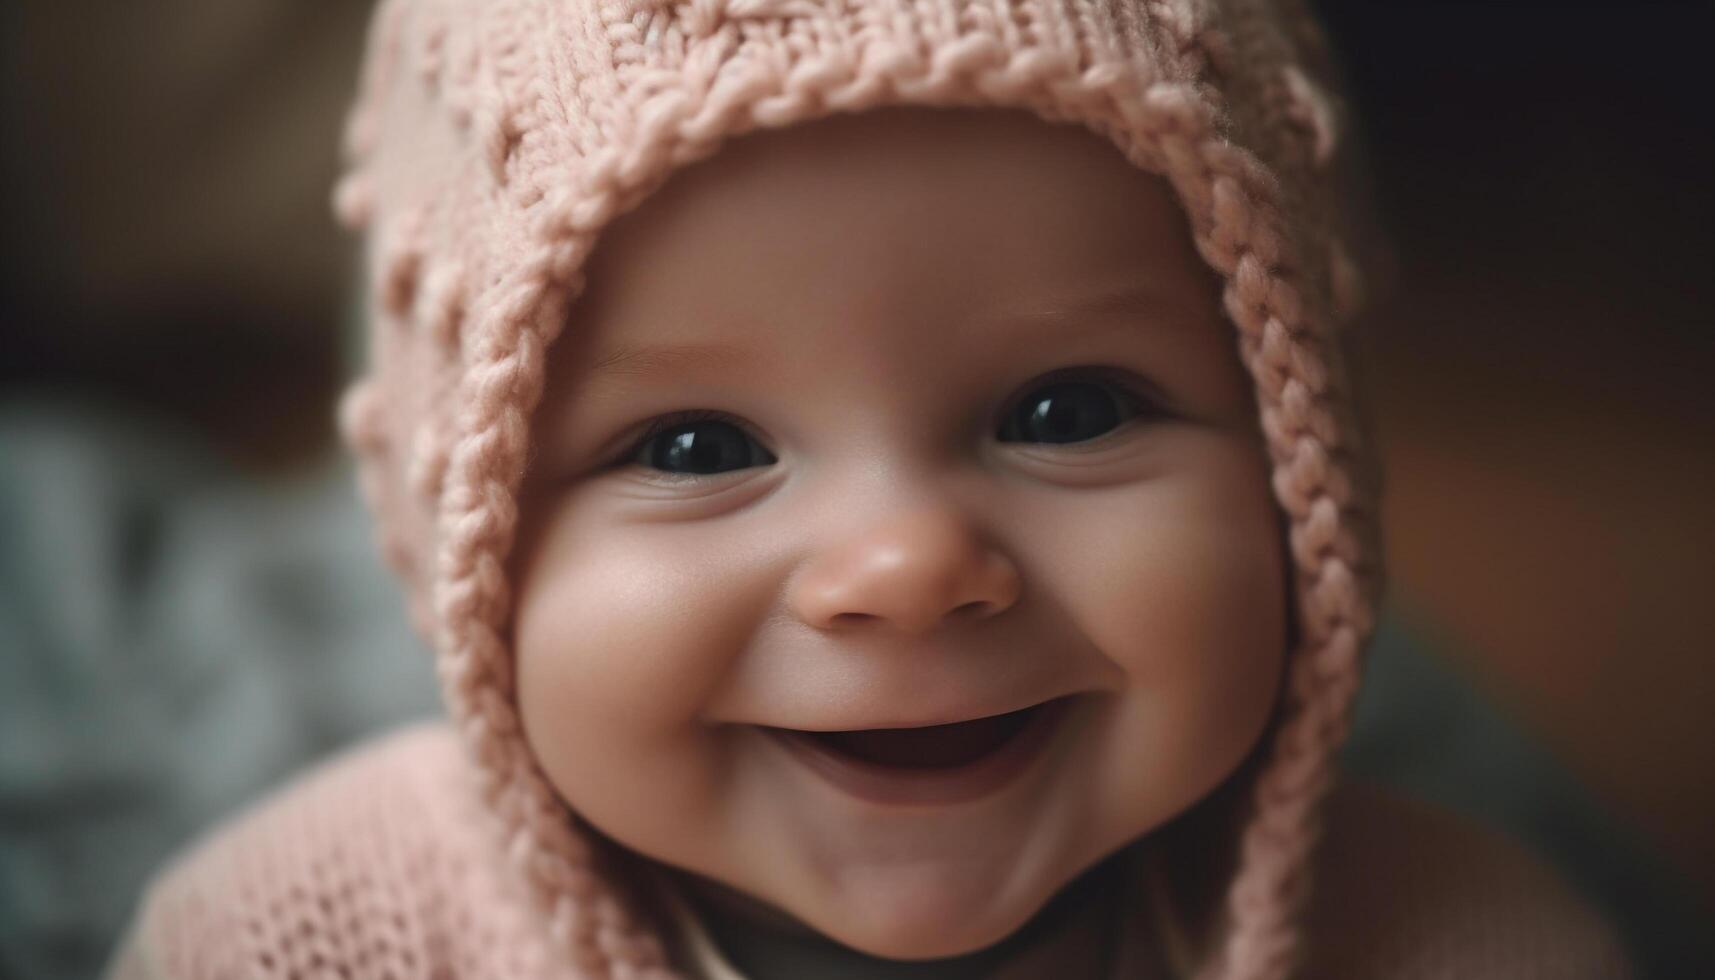 Joyful baby girl laughing outdoors in warm winter clothing generated by AI photo